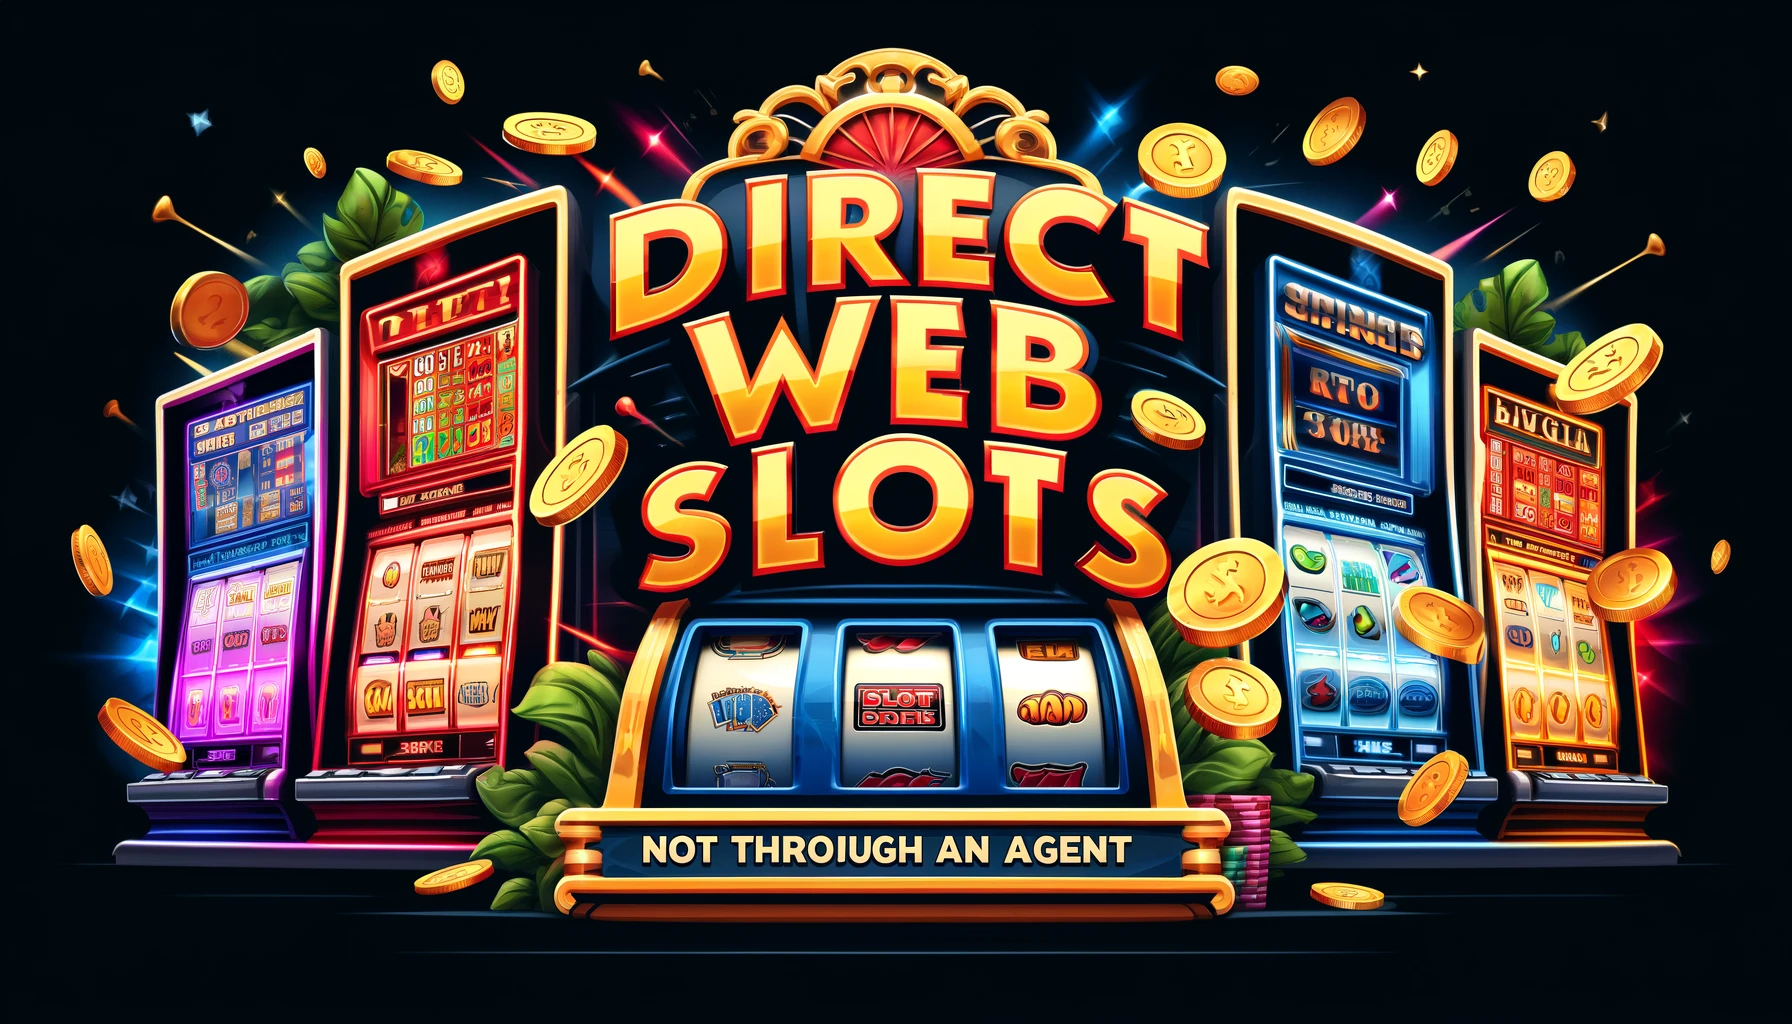 Direct web slots, not through an agent